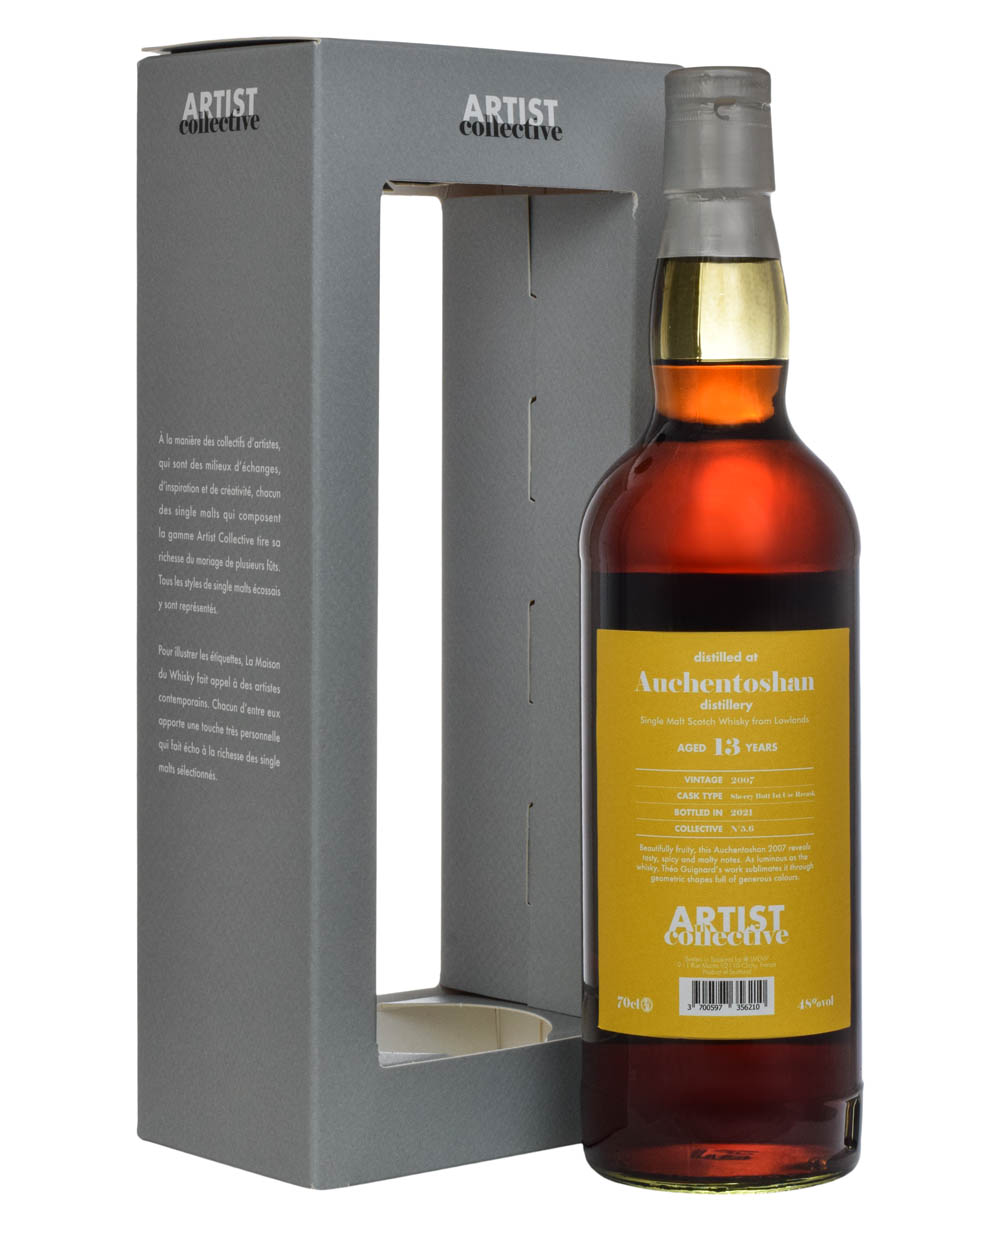 Auchentoshan 13 Years Old Artist Collective 2007 Box Must Have Malts MHM